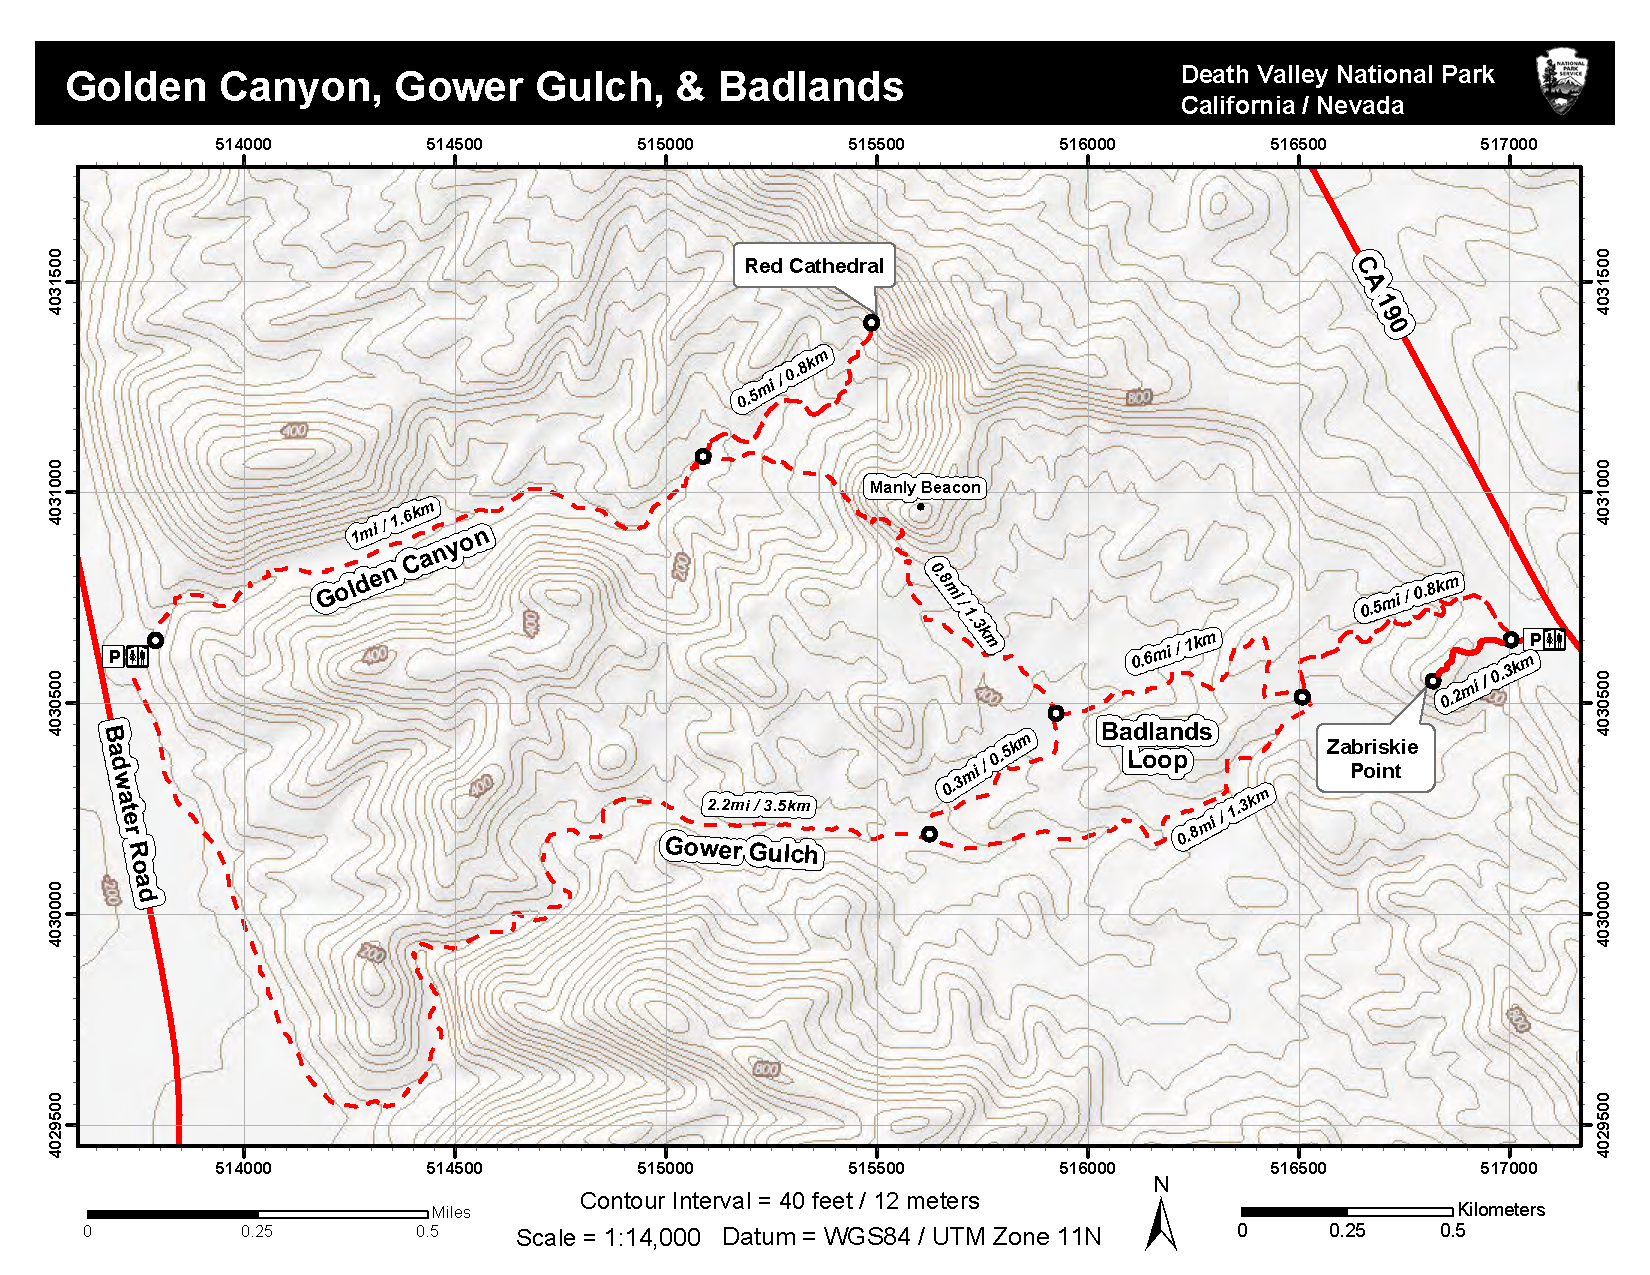 A topographic map showing popular routes in the Golden Canyon area.